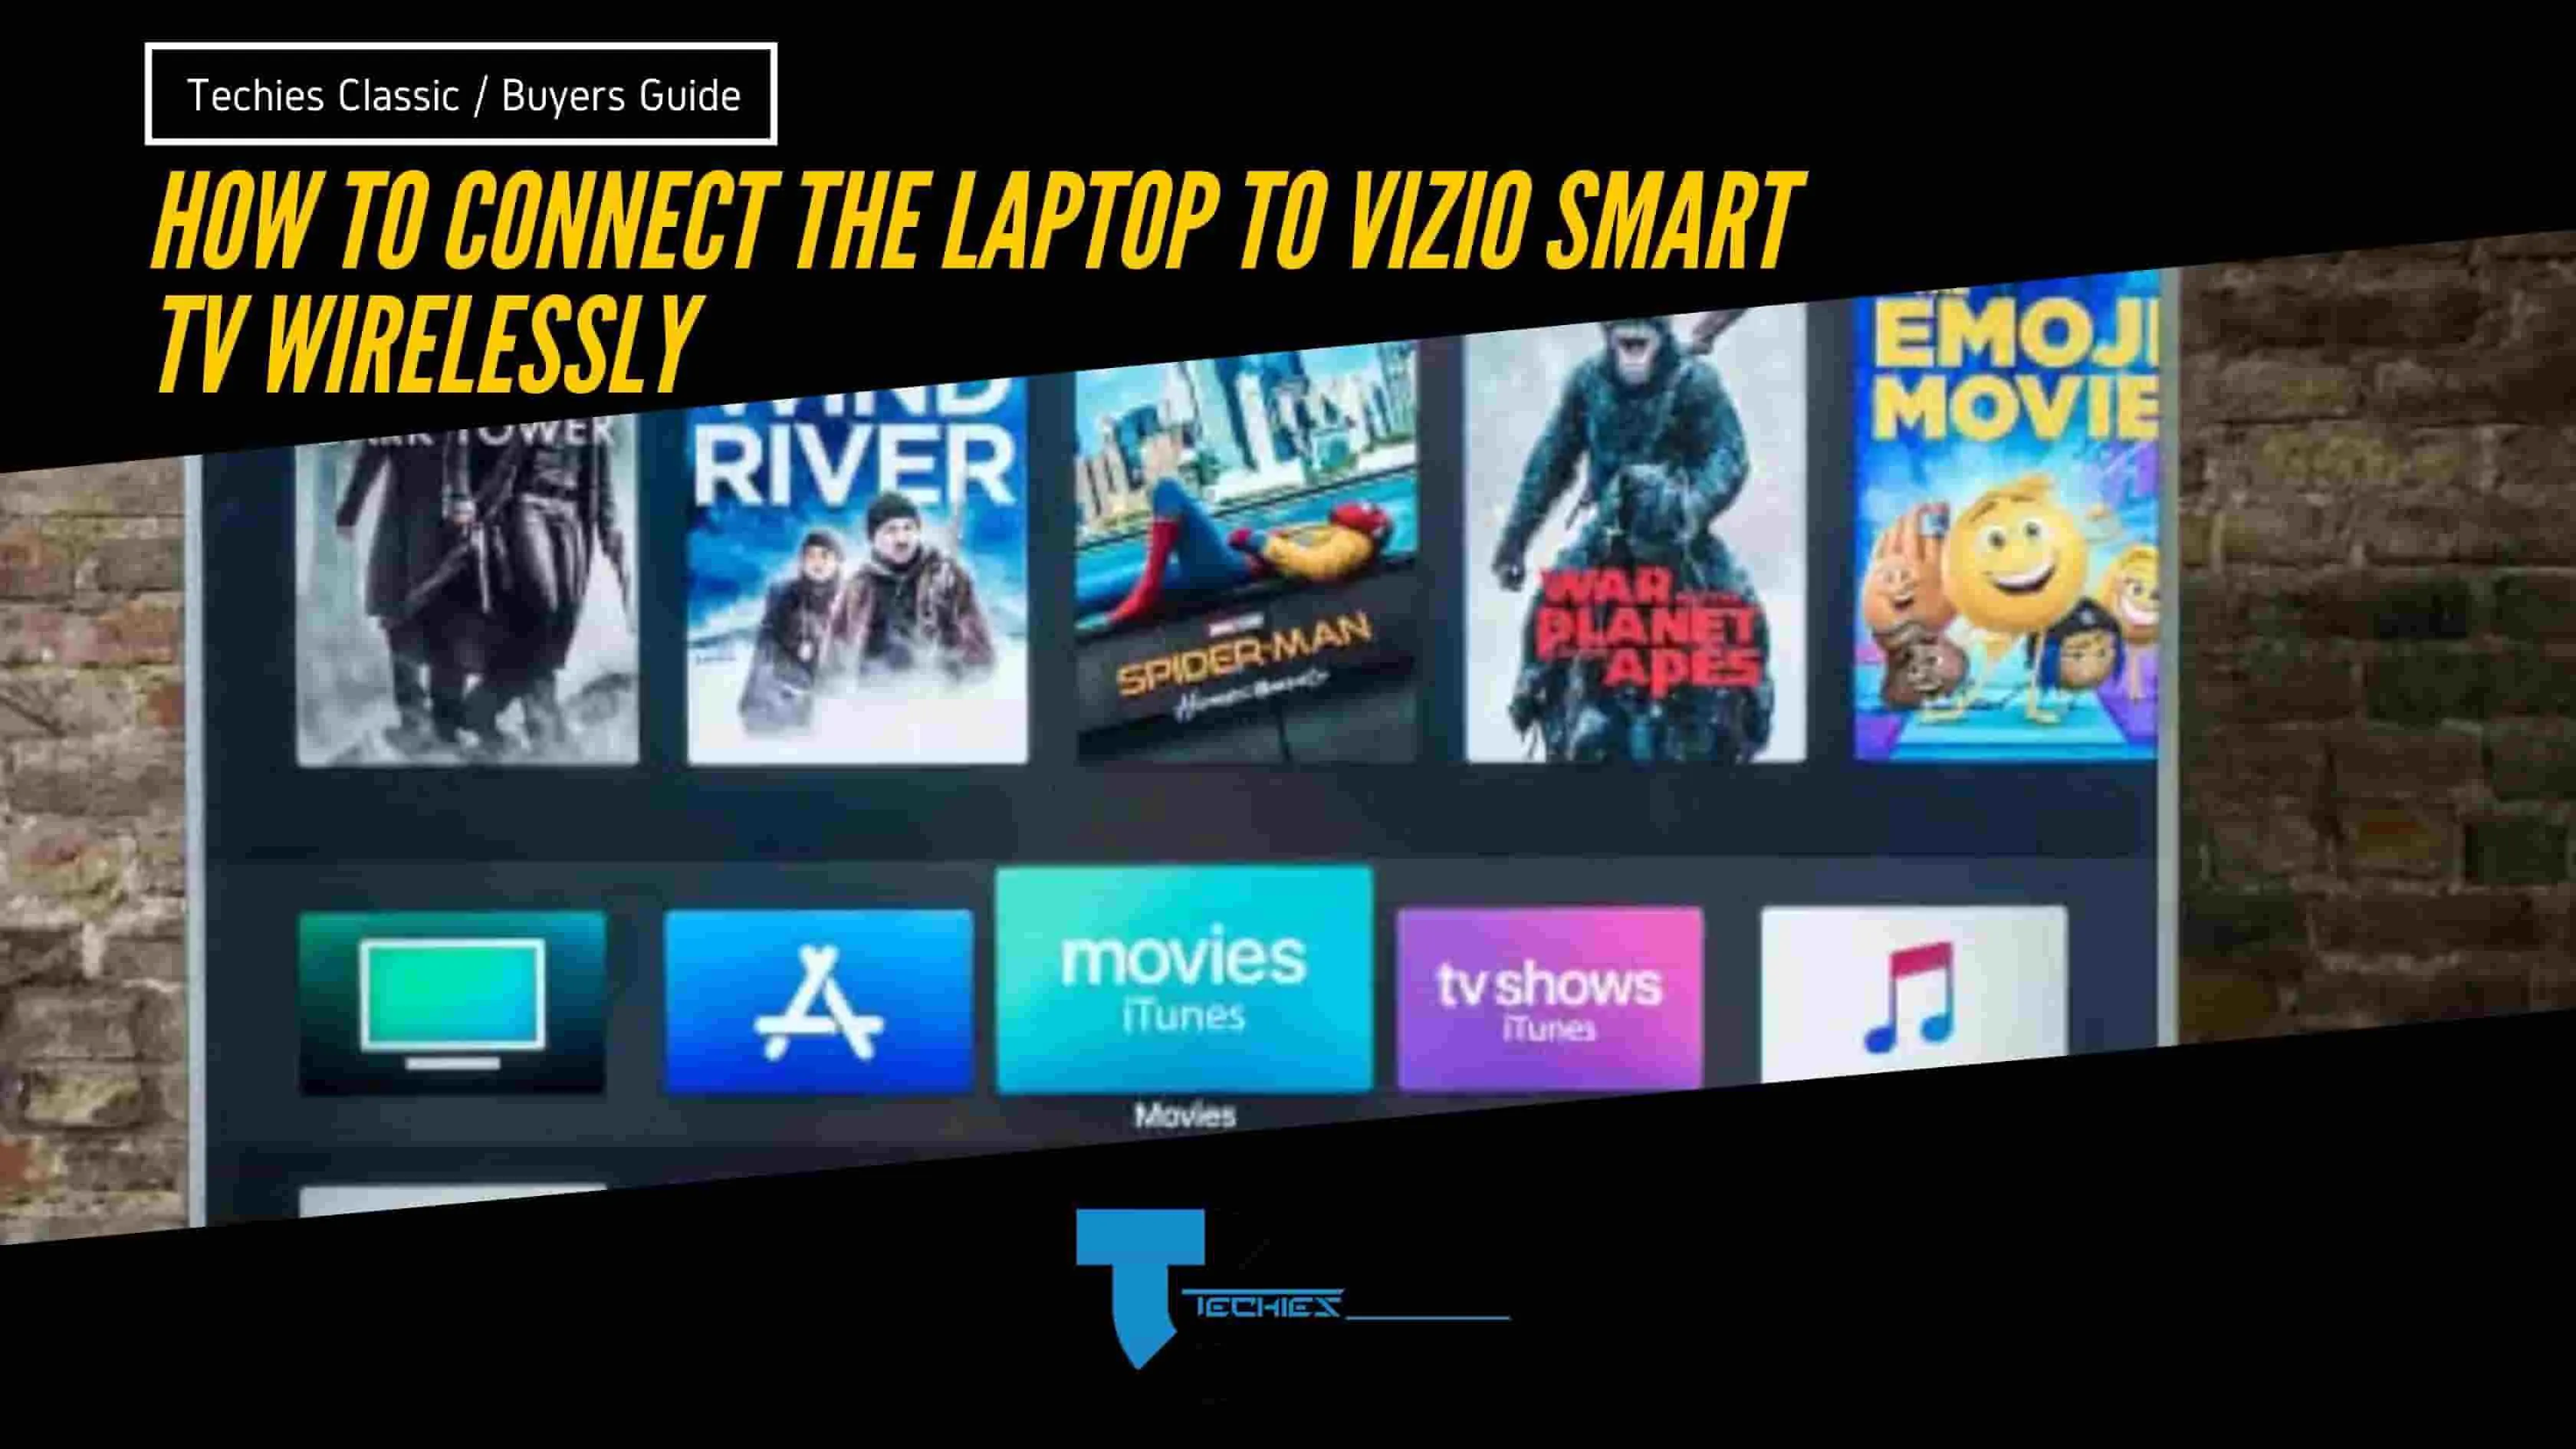 How to connect the laptop to Vizio smart tv wirelessly